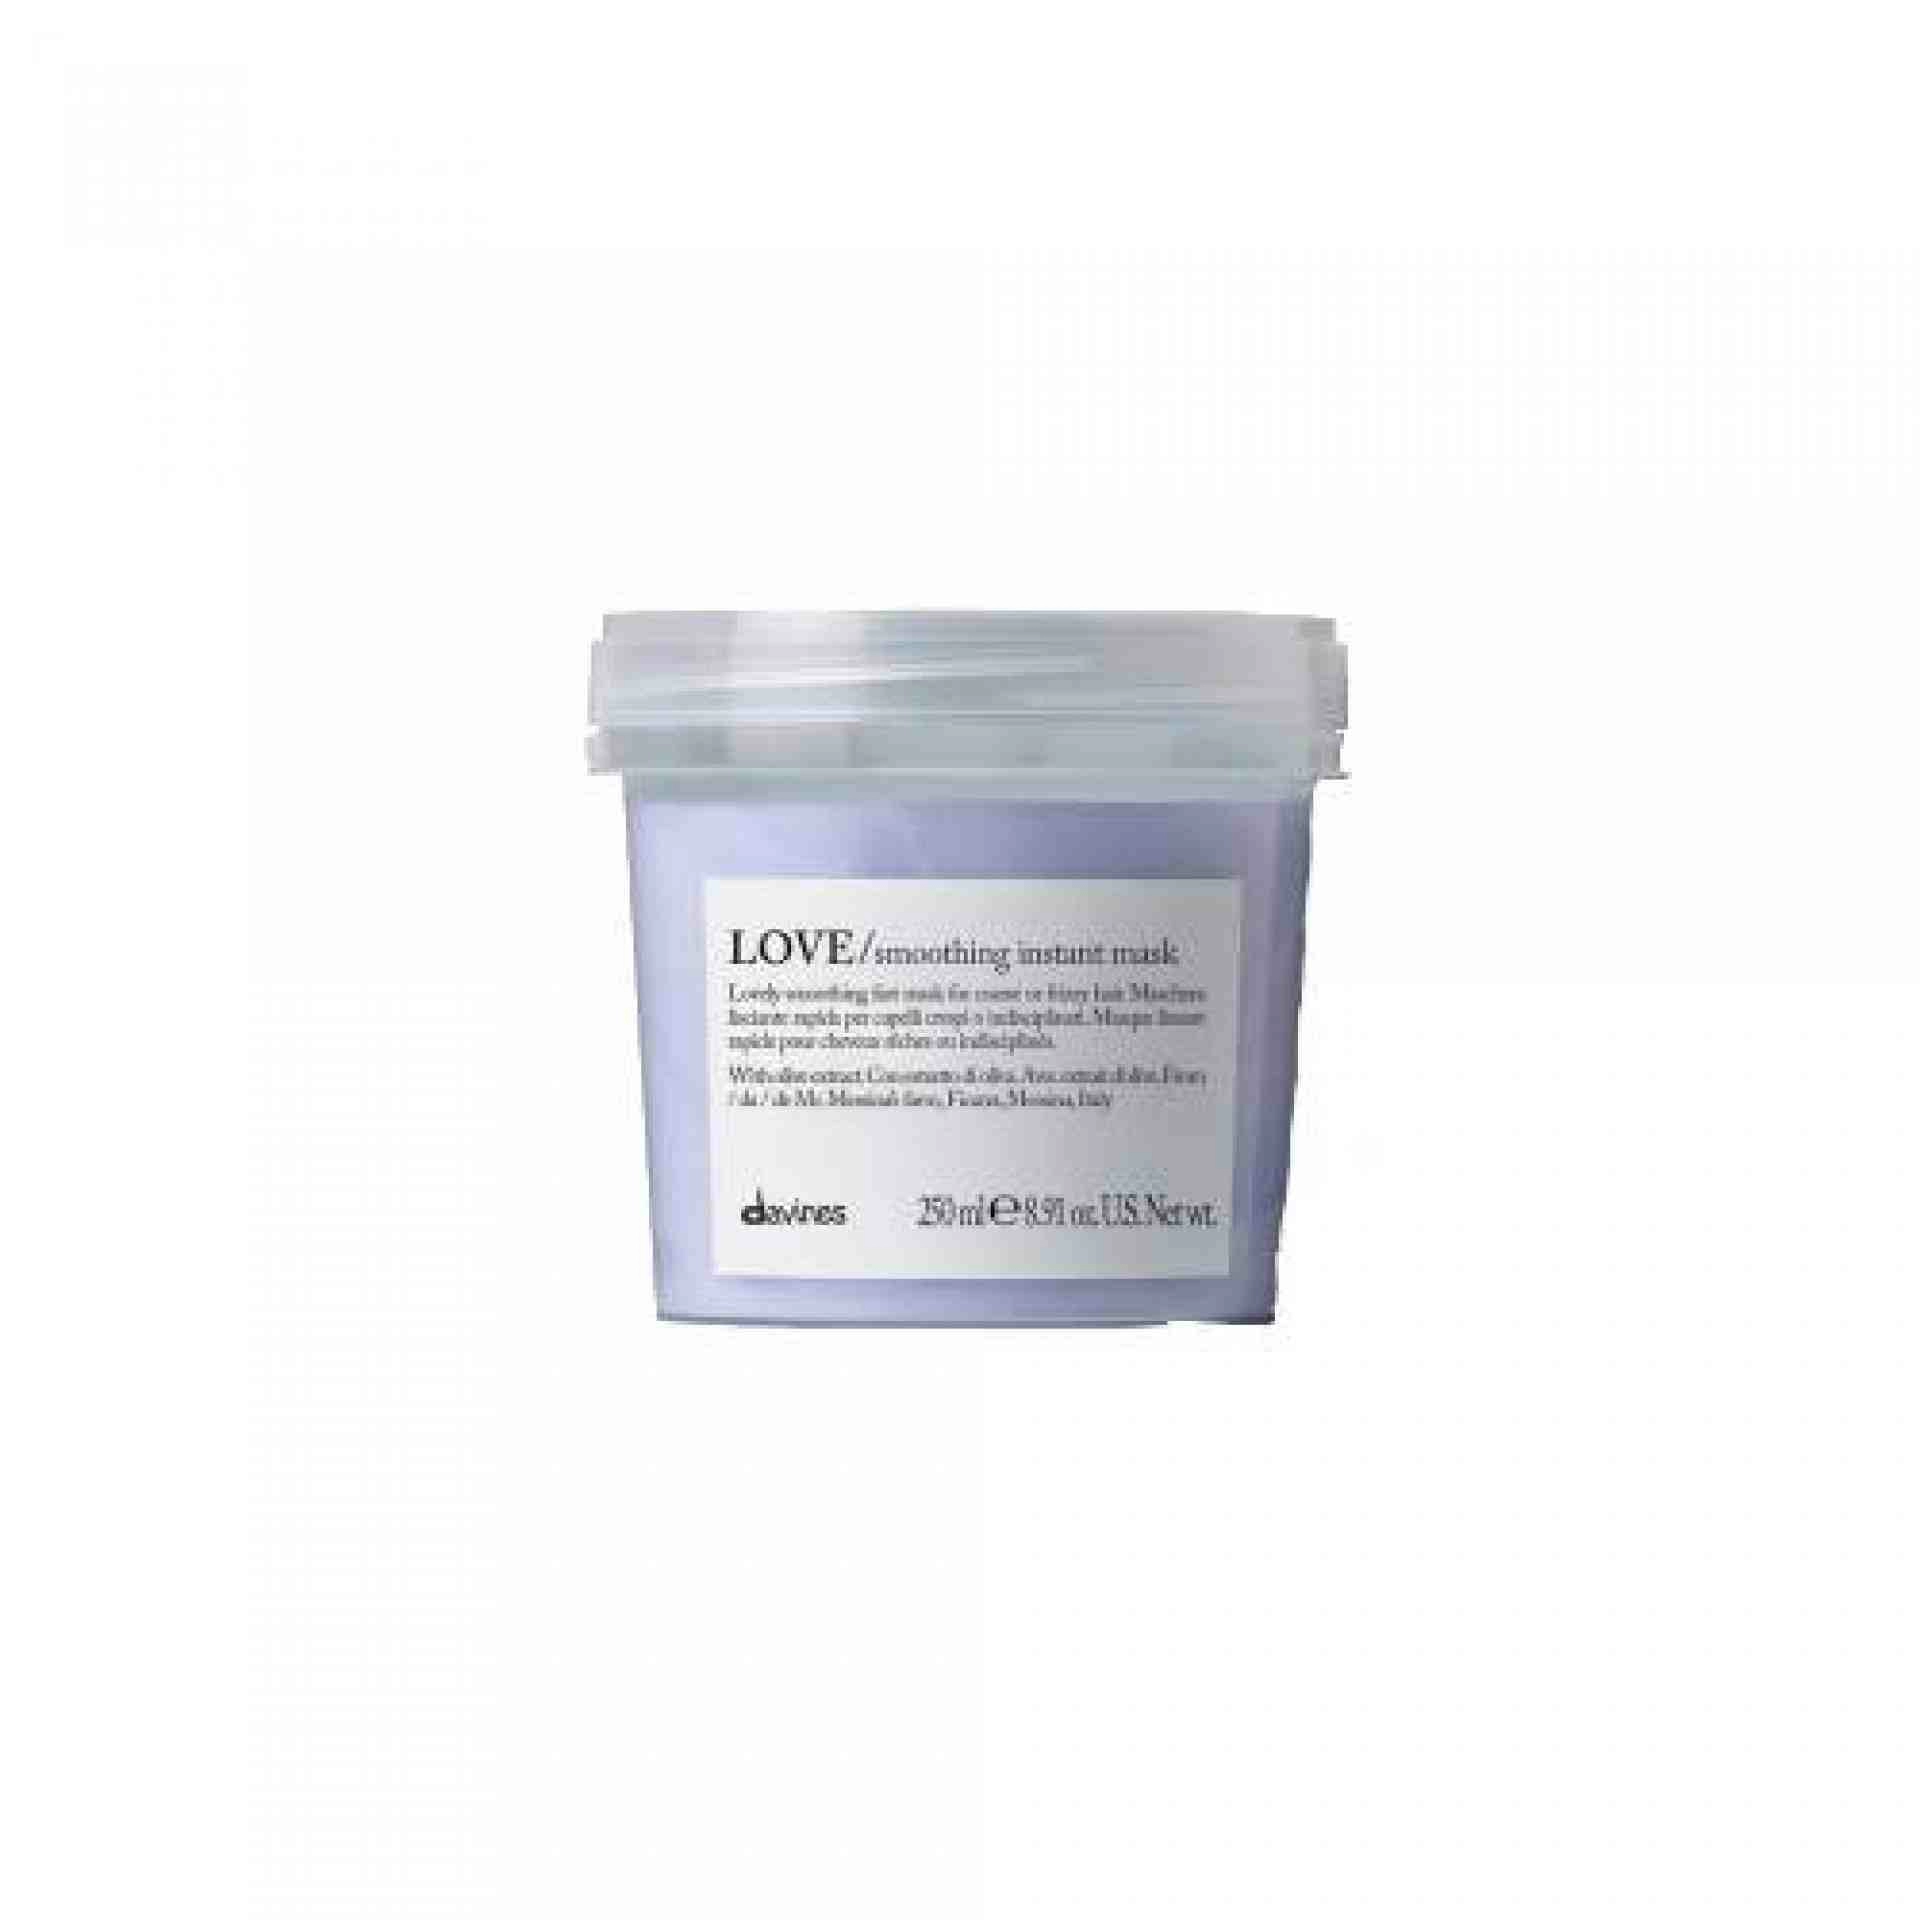 LOVE SMOOTHING / Instant Mask | Mascarilla disciplinante - Essential Haircare - Davines ®